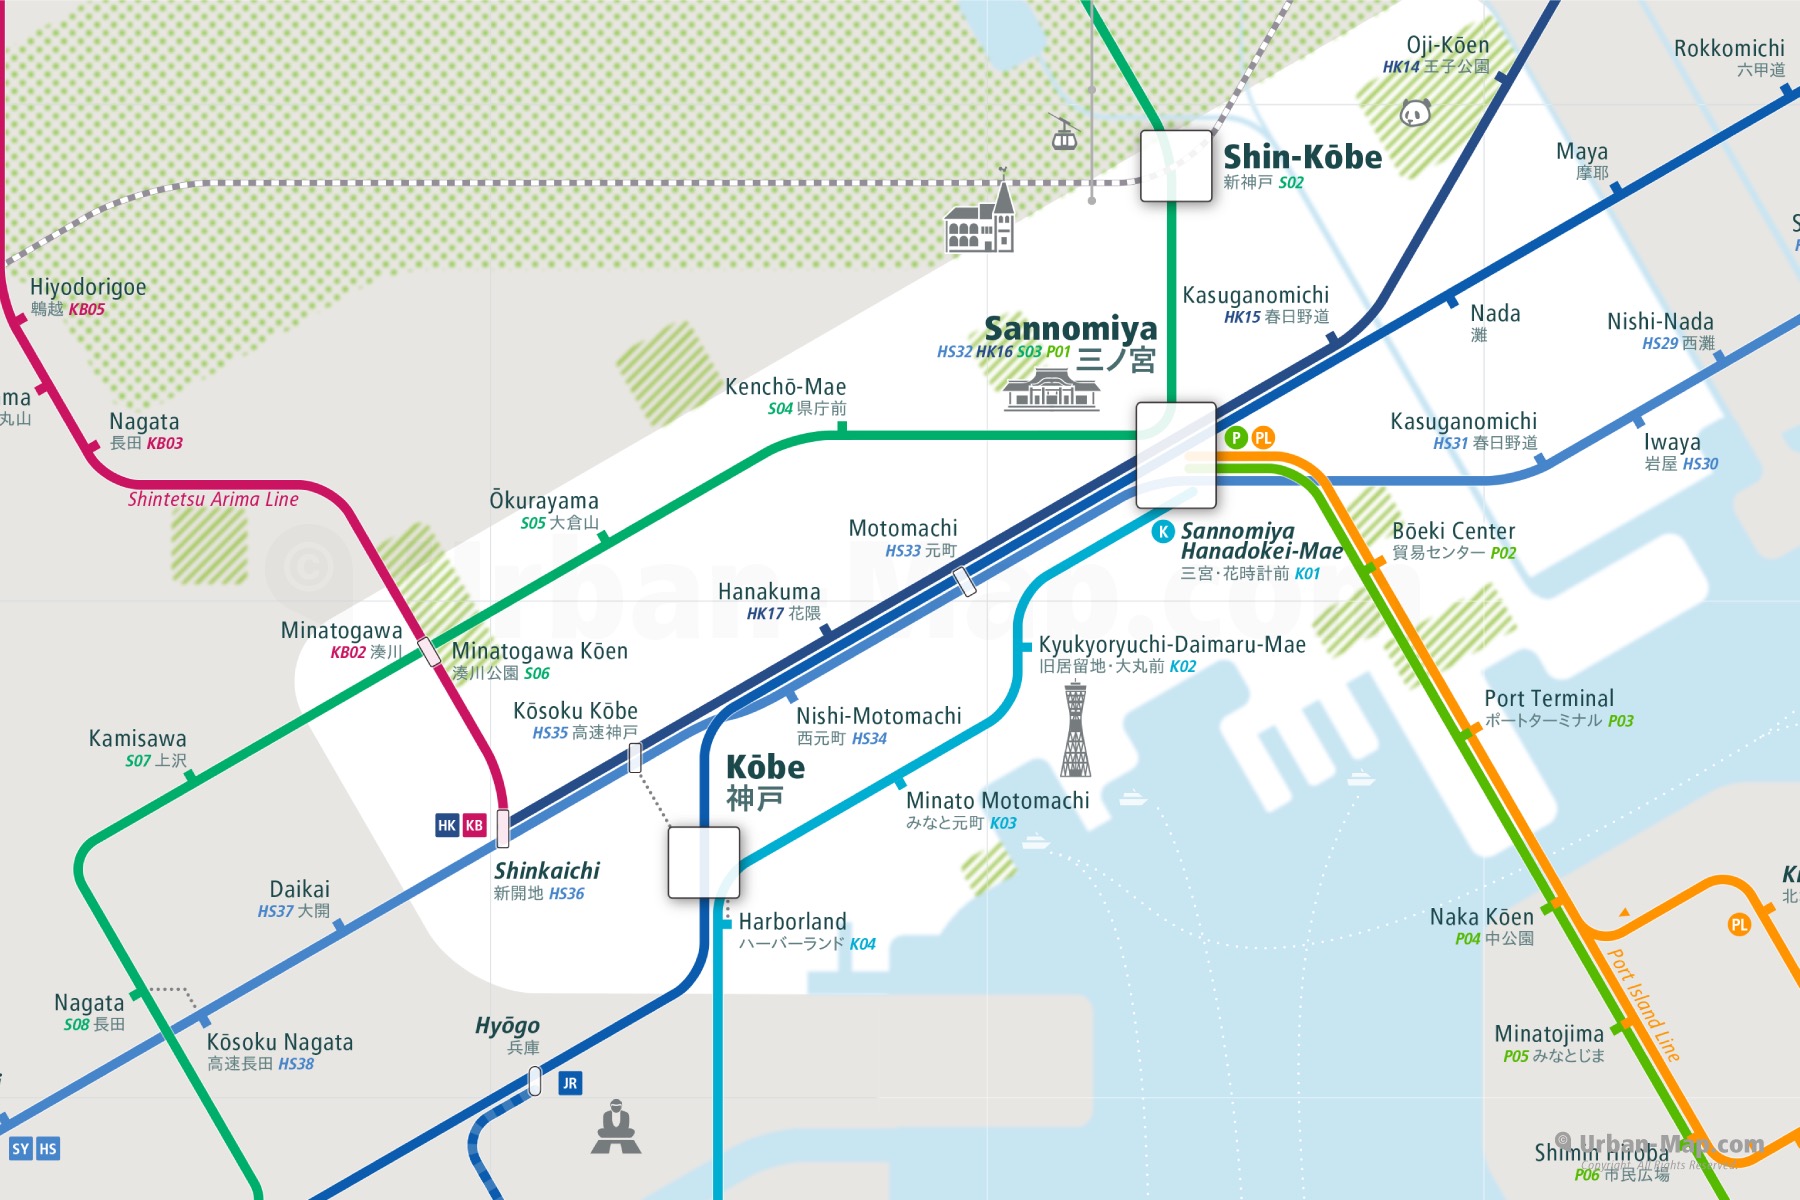 Kobe City Rail Map shows the train and public transportation routes of metro - Close-Up